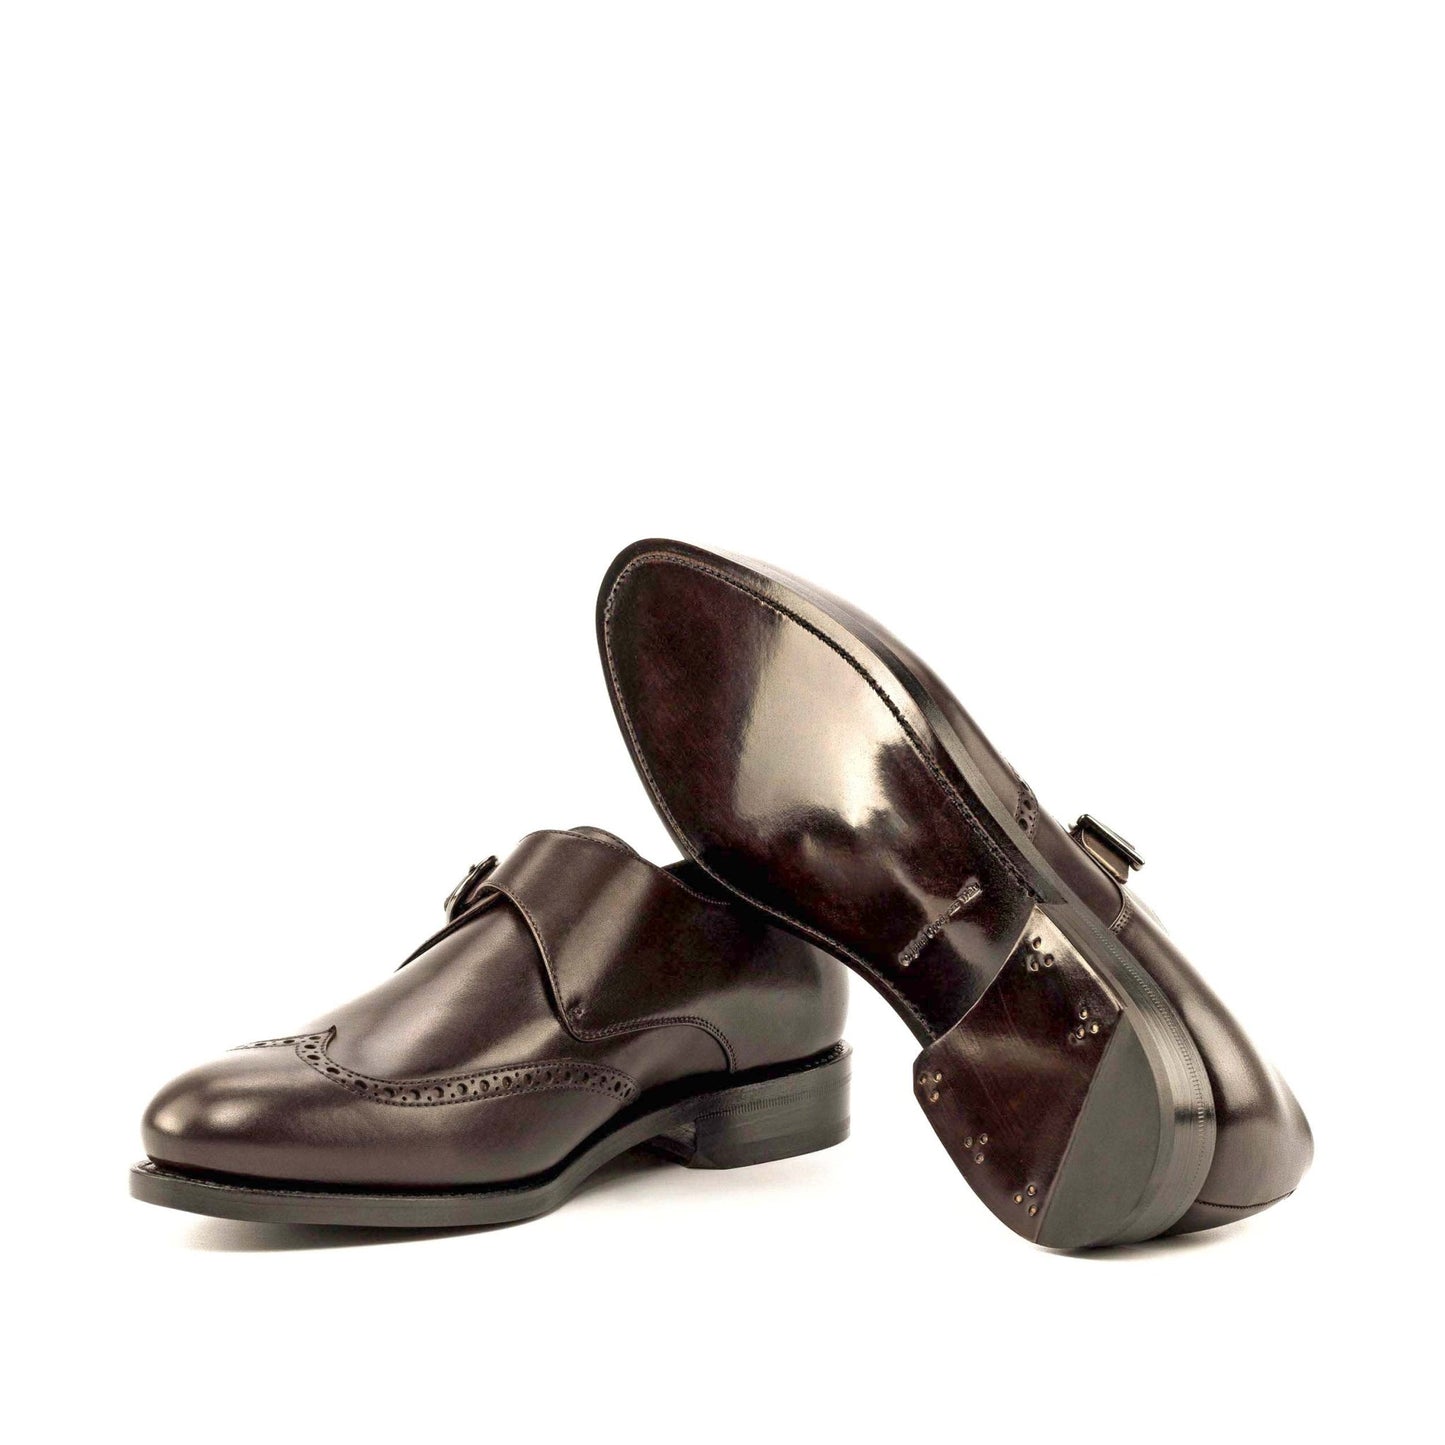 Single Monk in Dark Brown Box Calf - Zatorres | Free Shipping on orders over $200